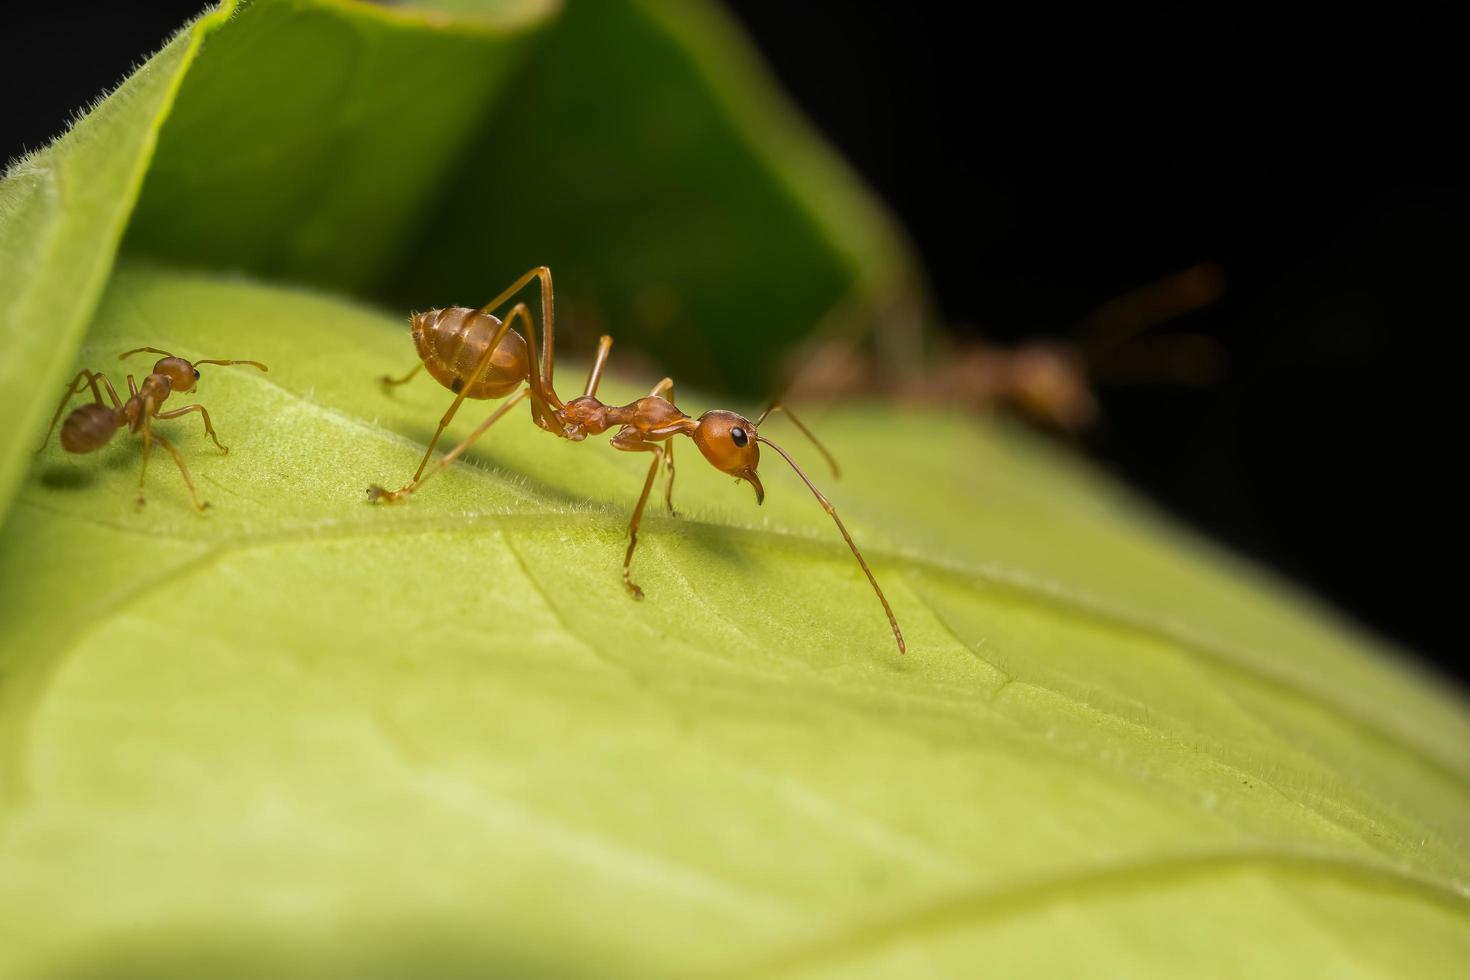 Red ant on a leaf photo